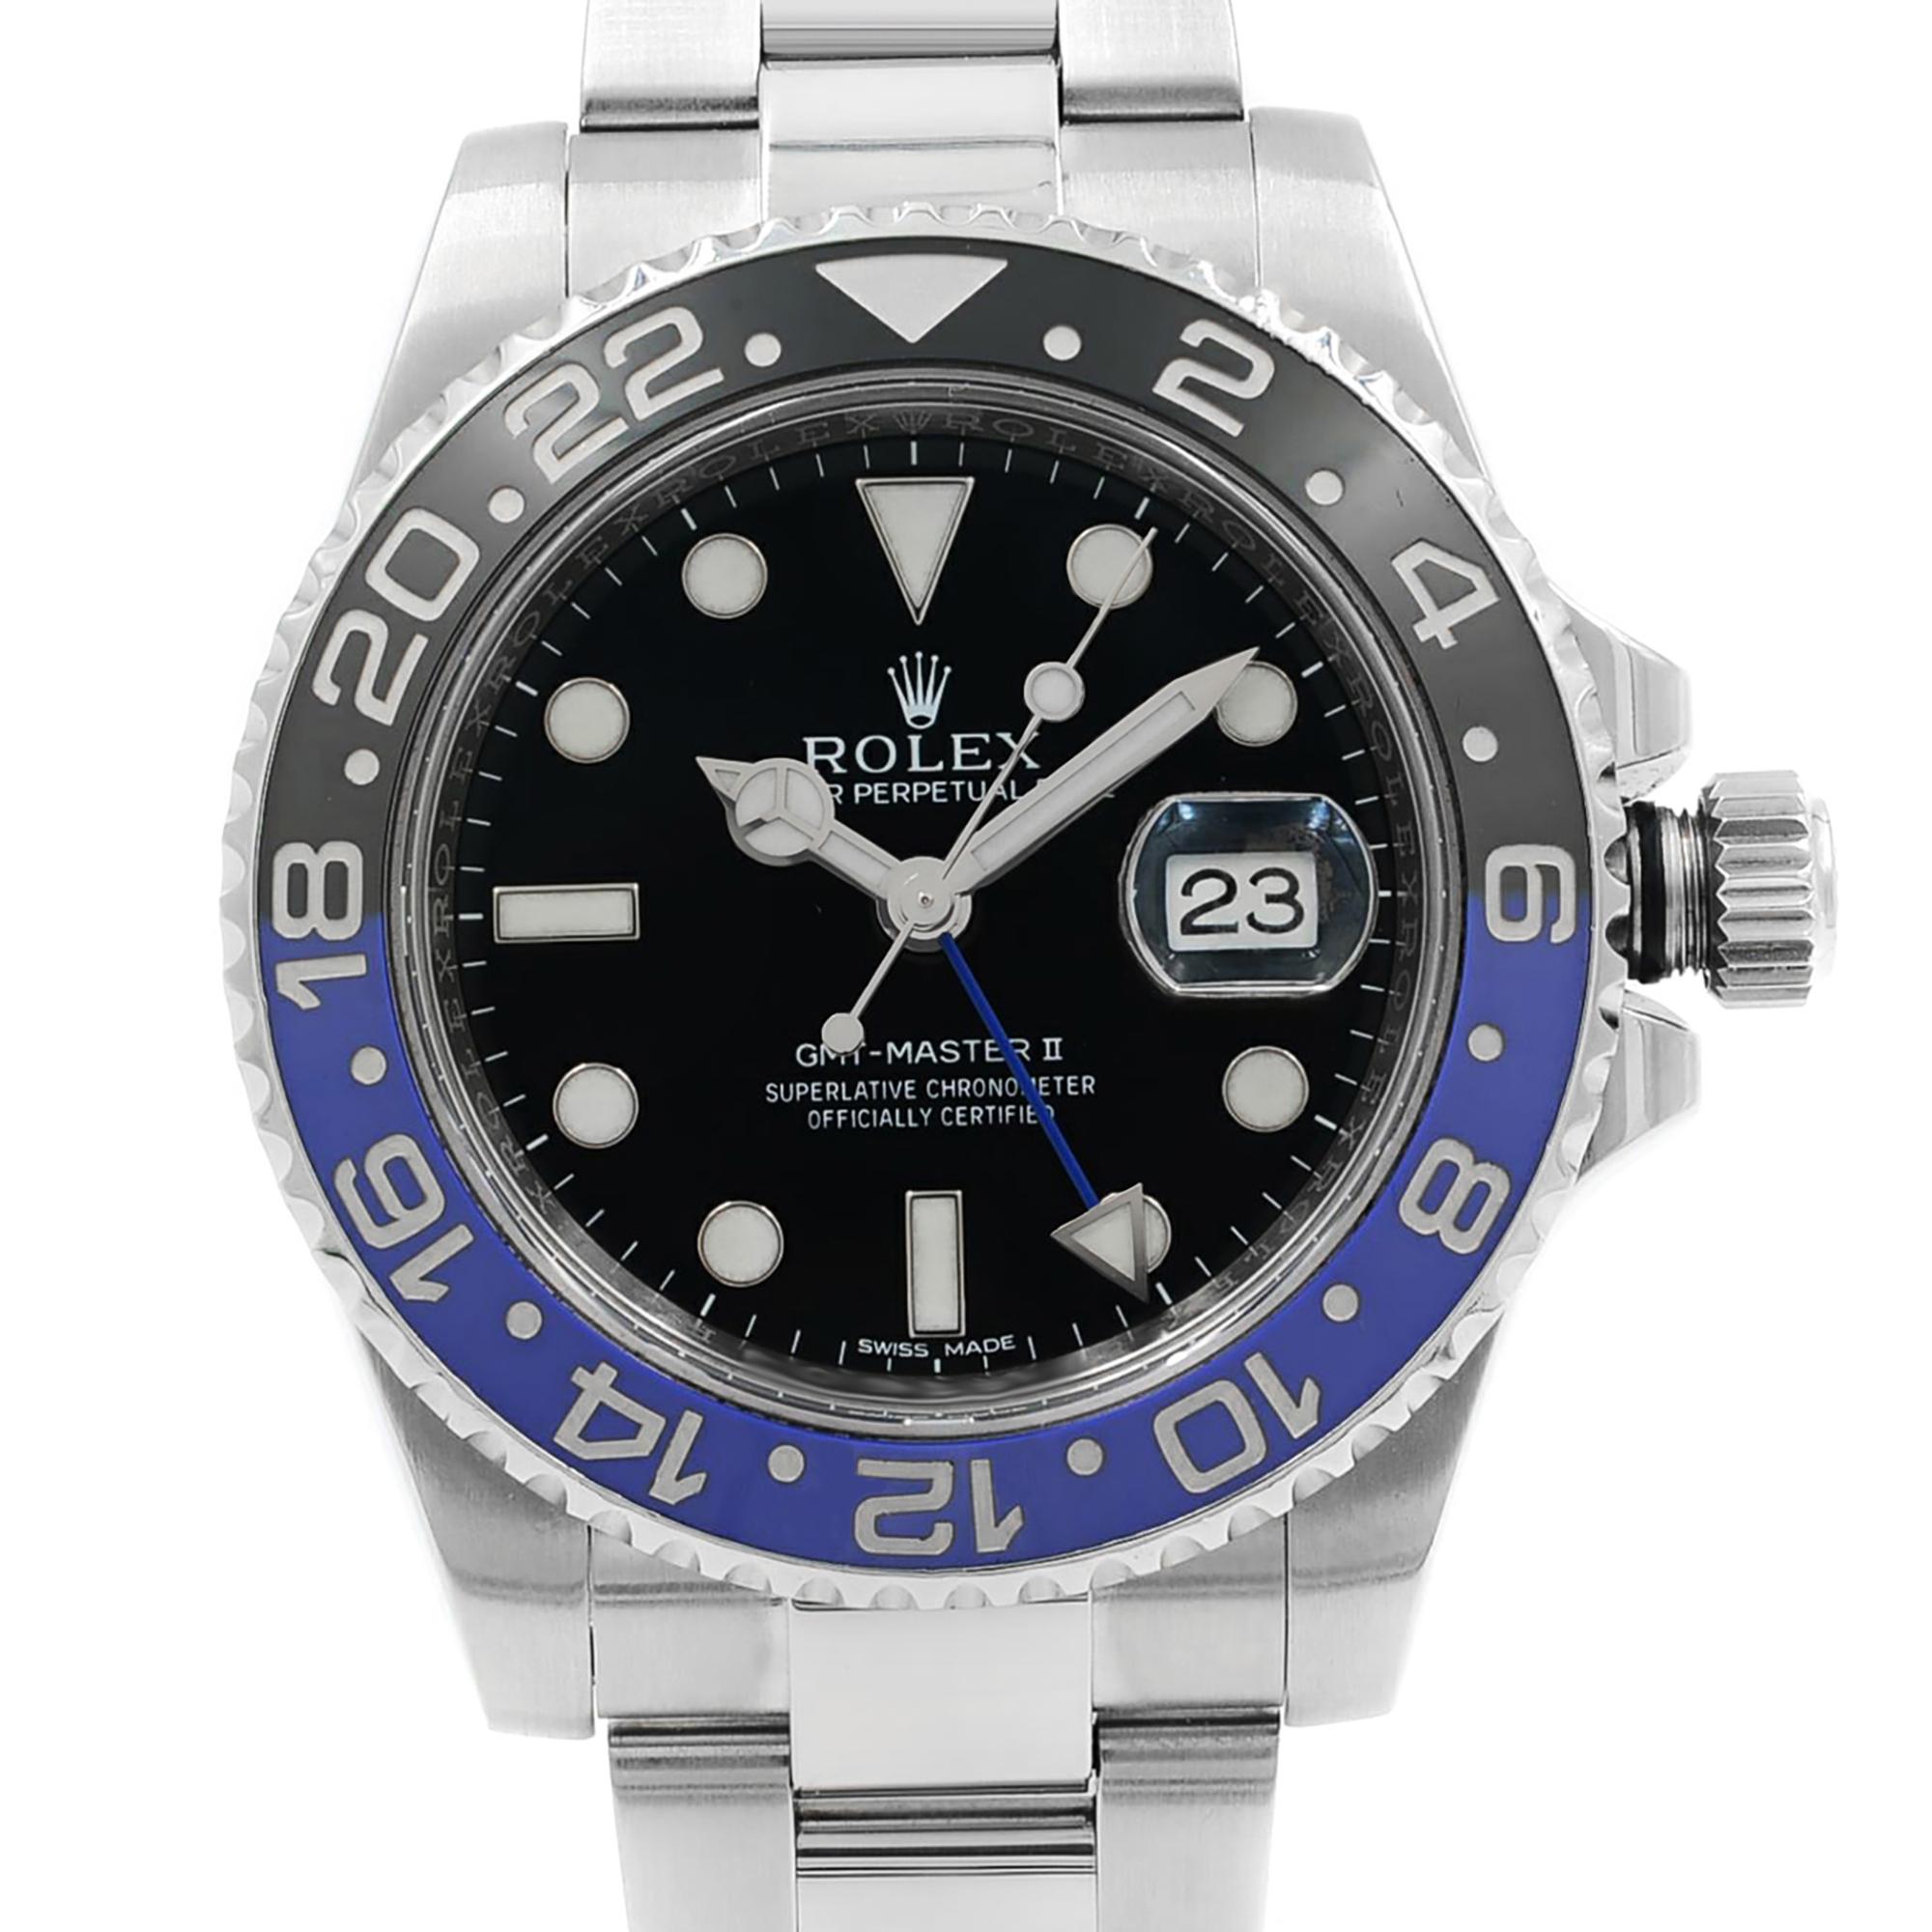 Pre-owned 2015 Card. Comes with the Original Box and Papers. Covered by a 3-year Chronostore Warranty.

Brand: Rolex
Model: Rolex GMT-Master II 116710BLNR
Model Number: 116710BLNR
Movement: Mechanical (Automatic)
Movement Caliber: Rolex calibre